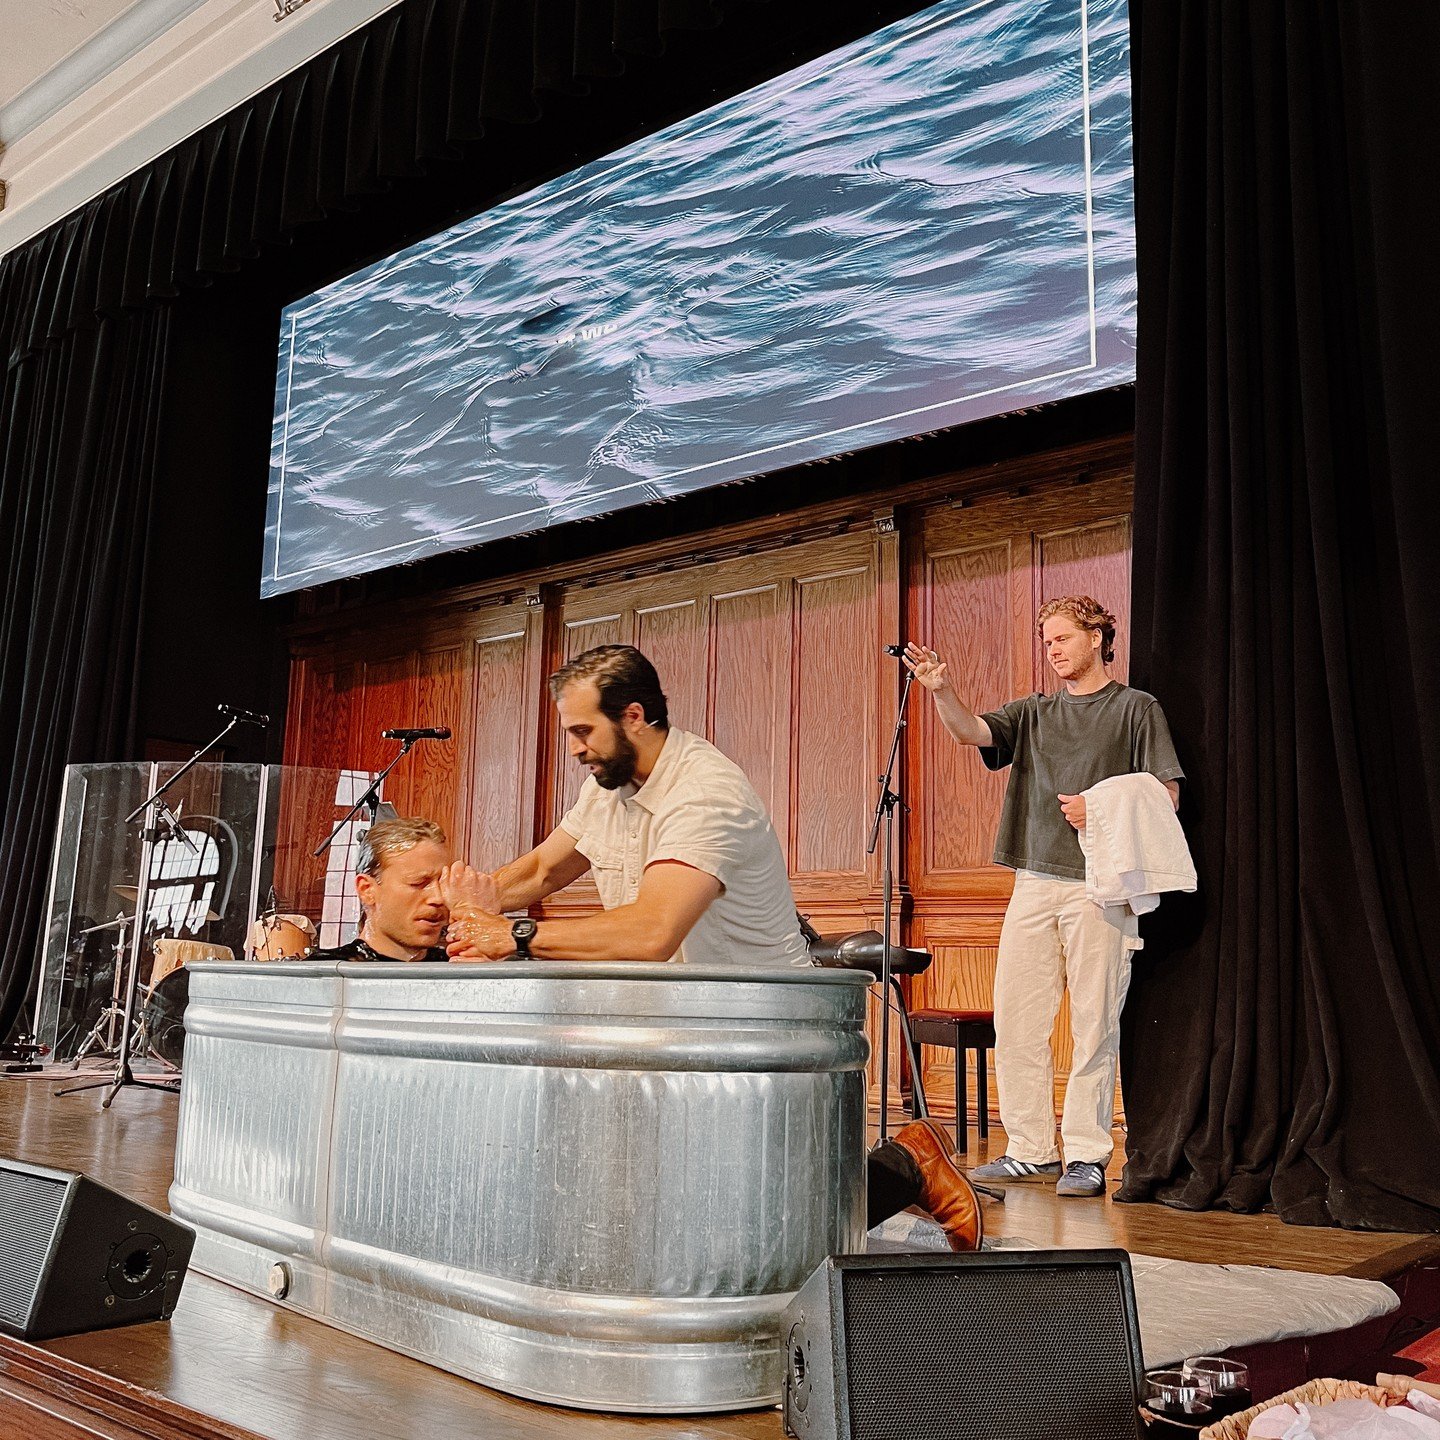 Any Sunday that we get to witness people following Jesus in obedience through baptism is a great Sunday!